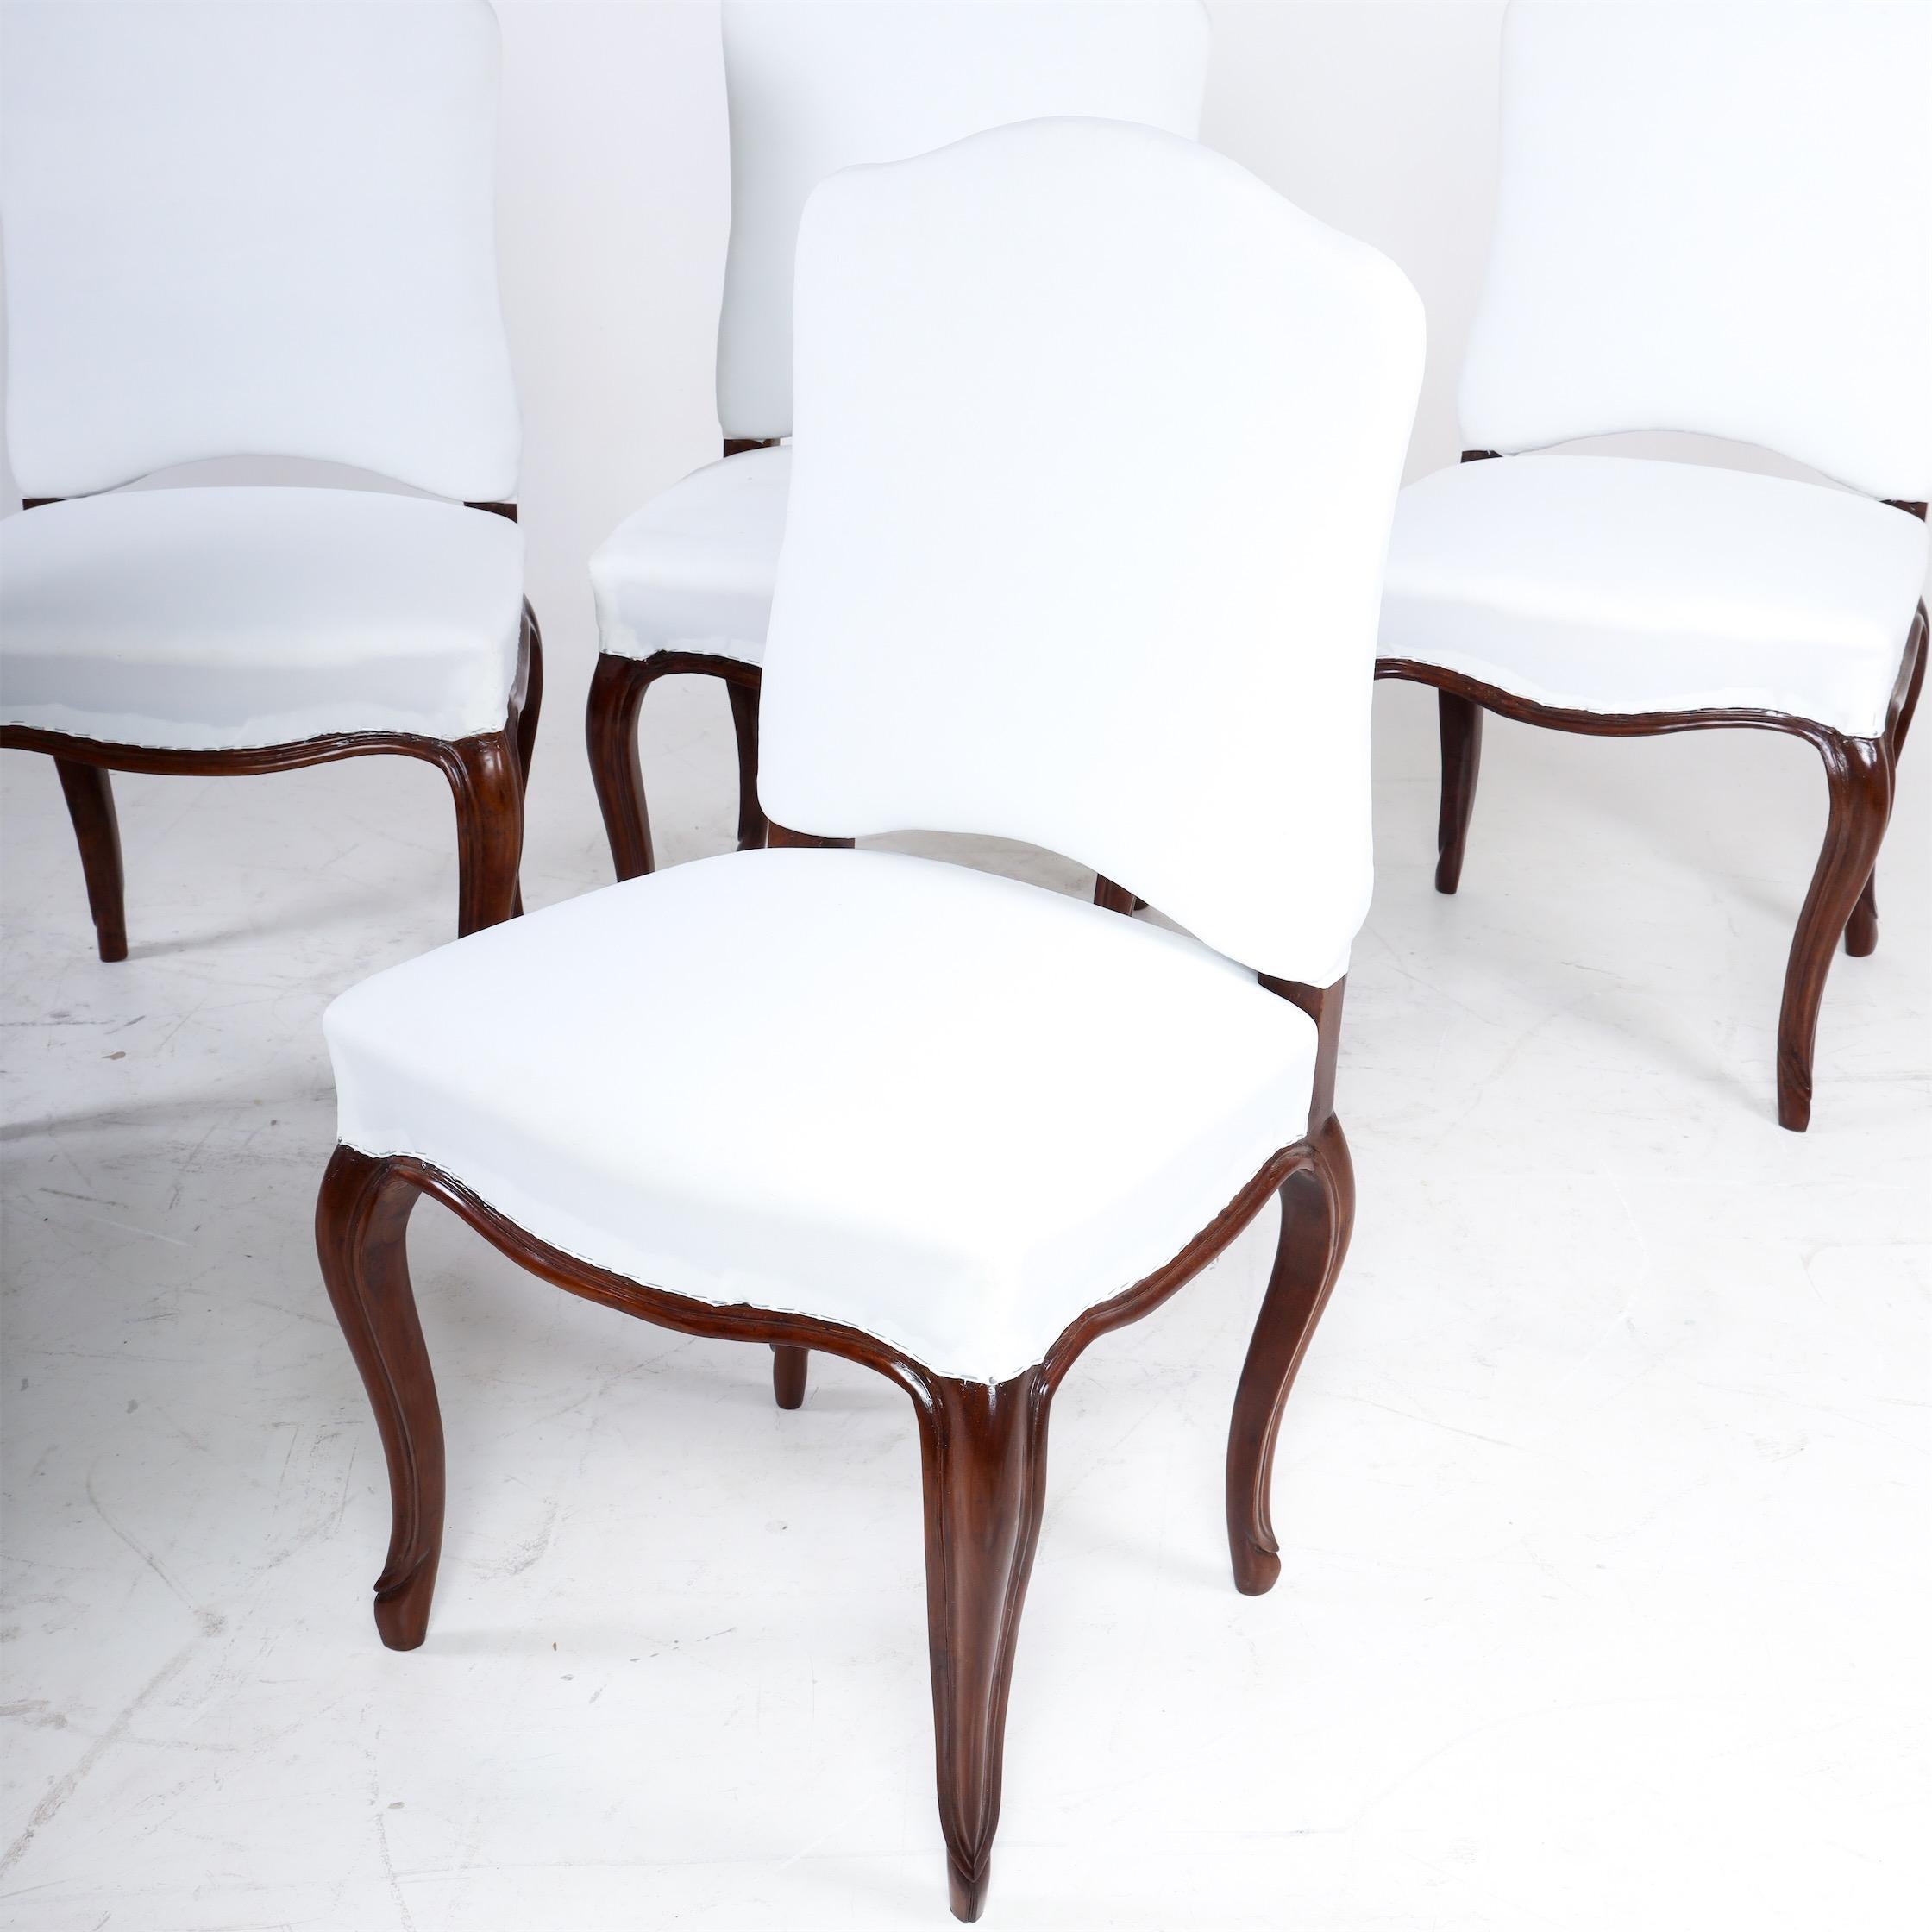 Walnut Set of Five Italian Baroque Chairs, 18th Century For Sale